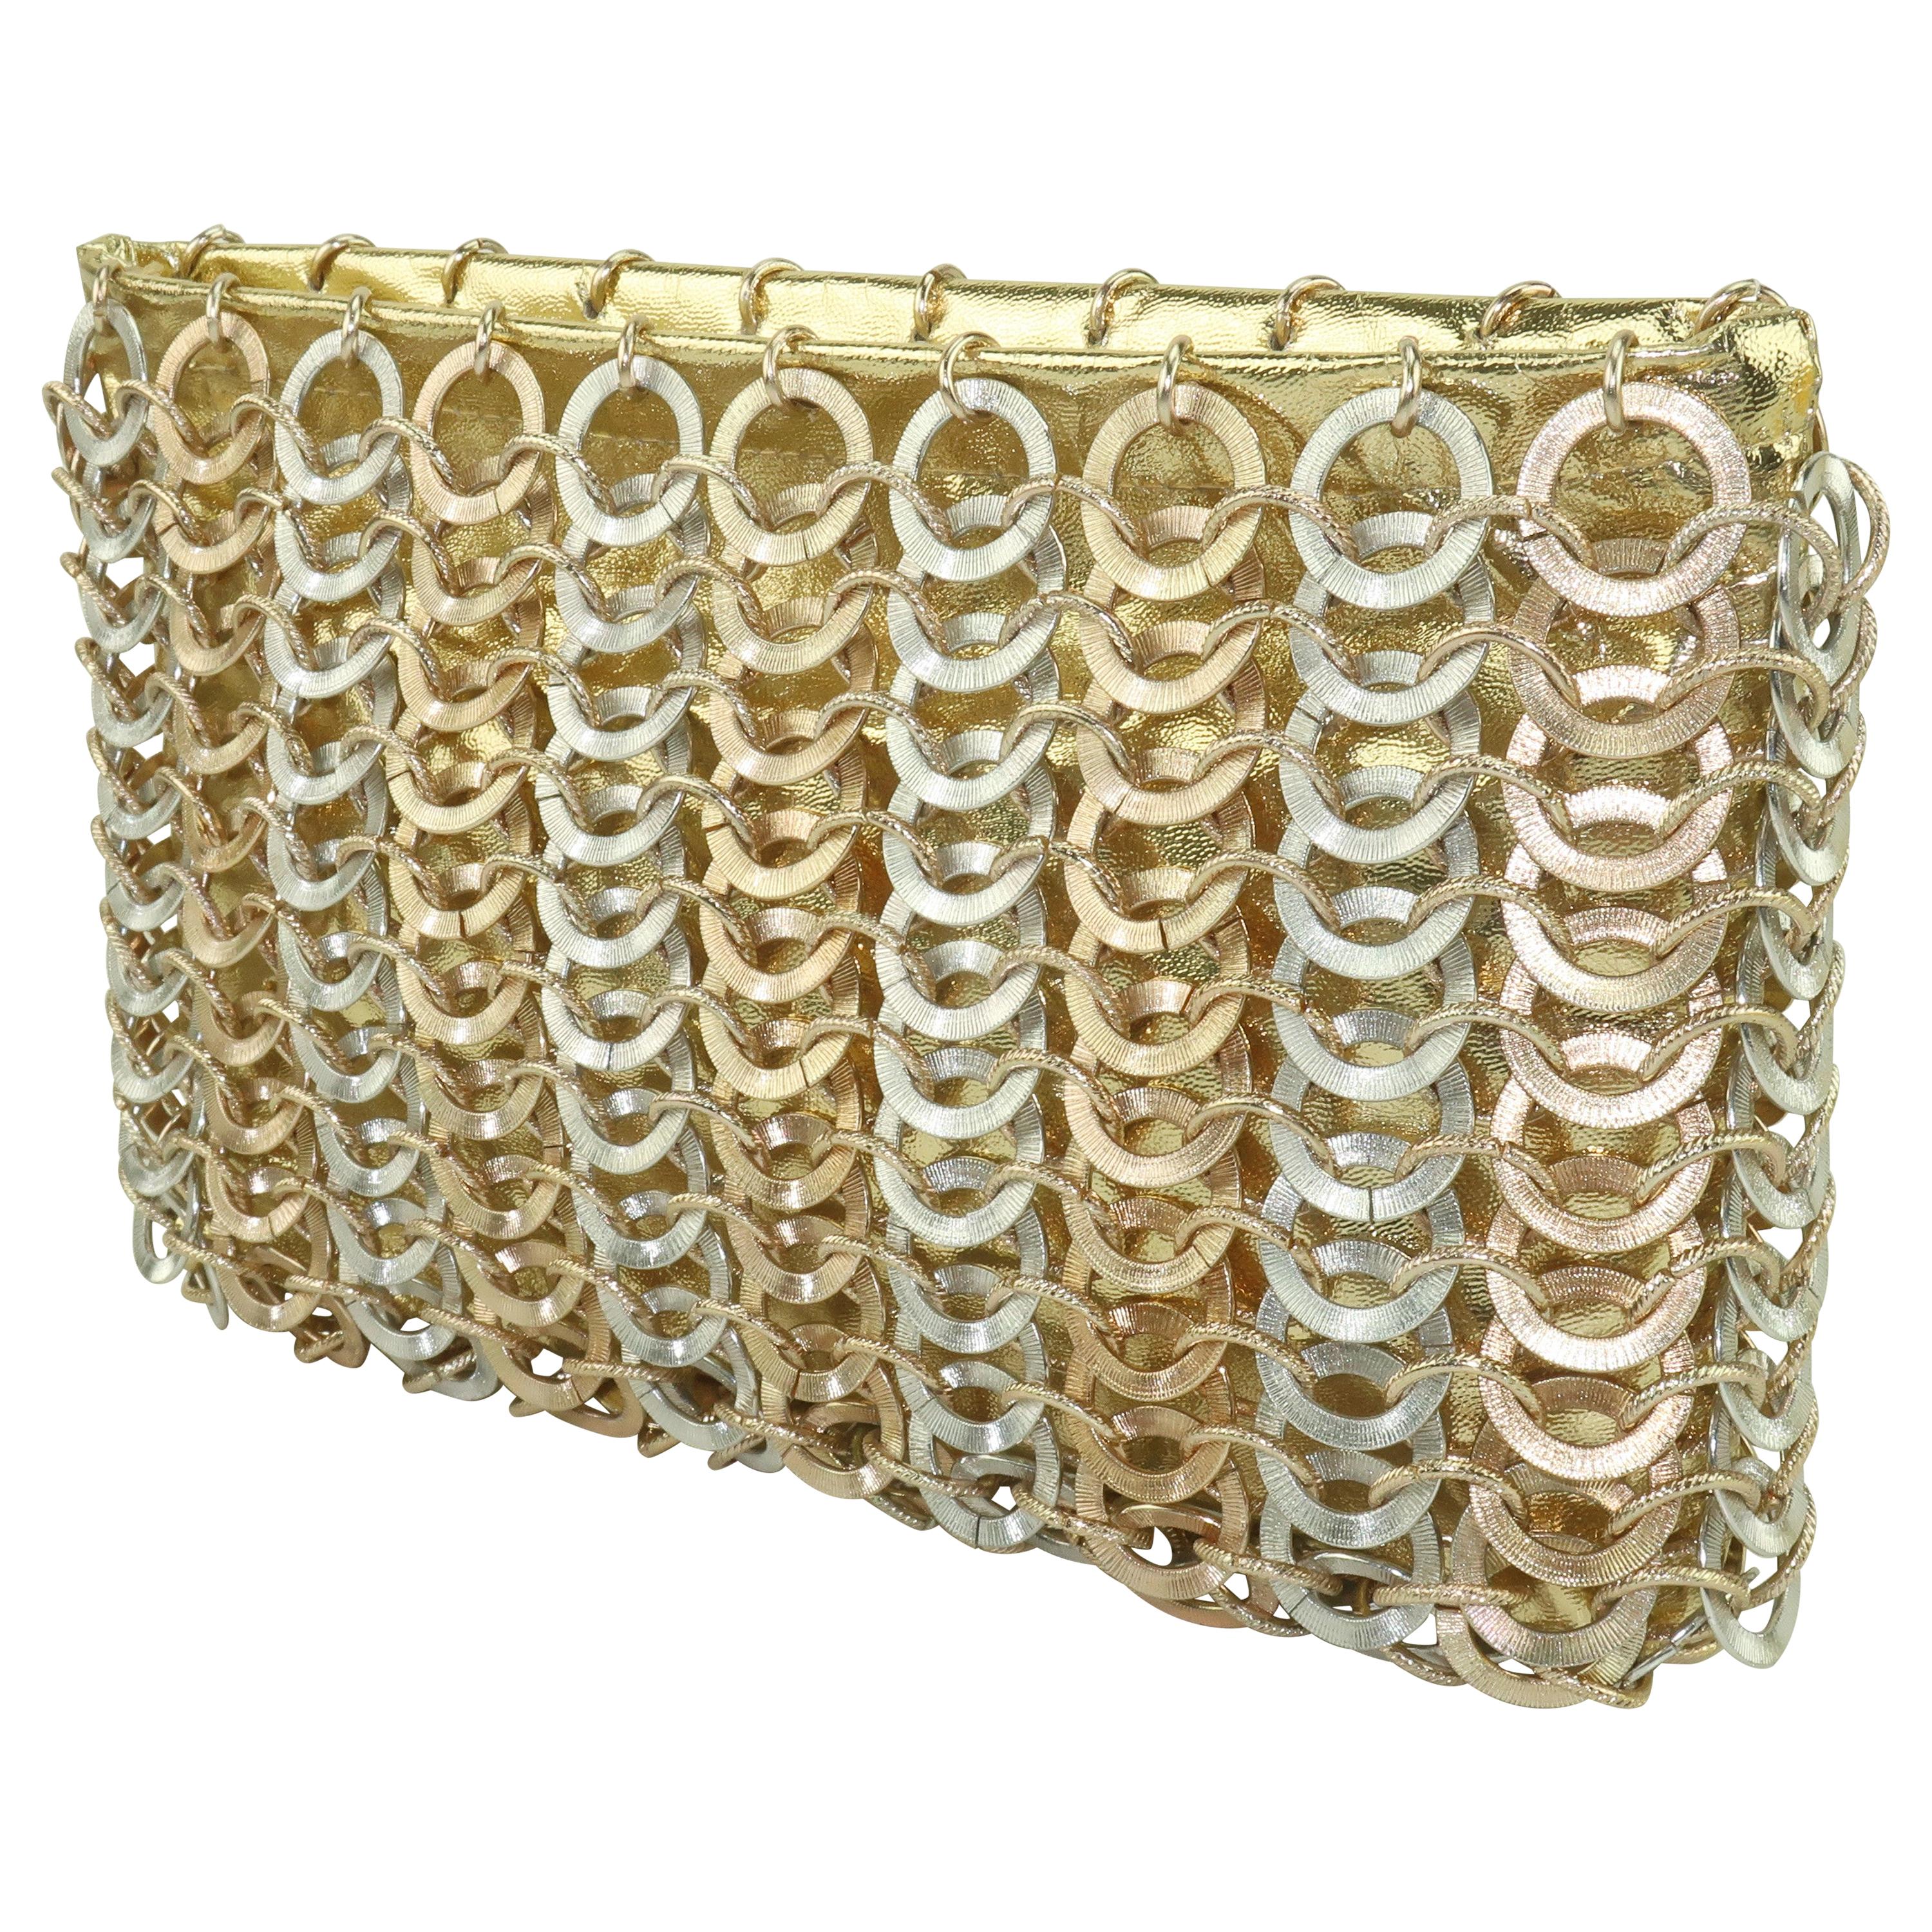 Saks Fifth Avenue Gold Silver Chain Mail Style Clutch Handbag, 1960's